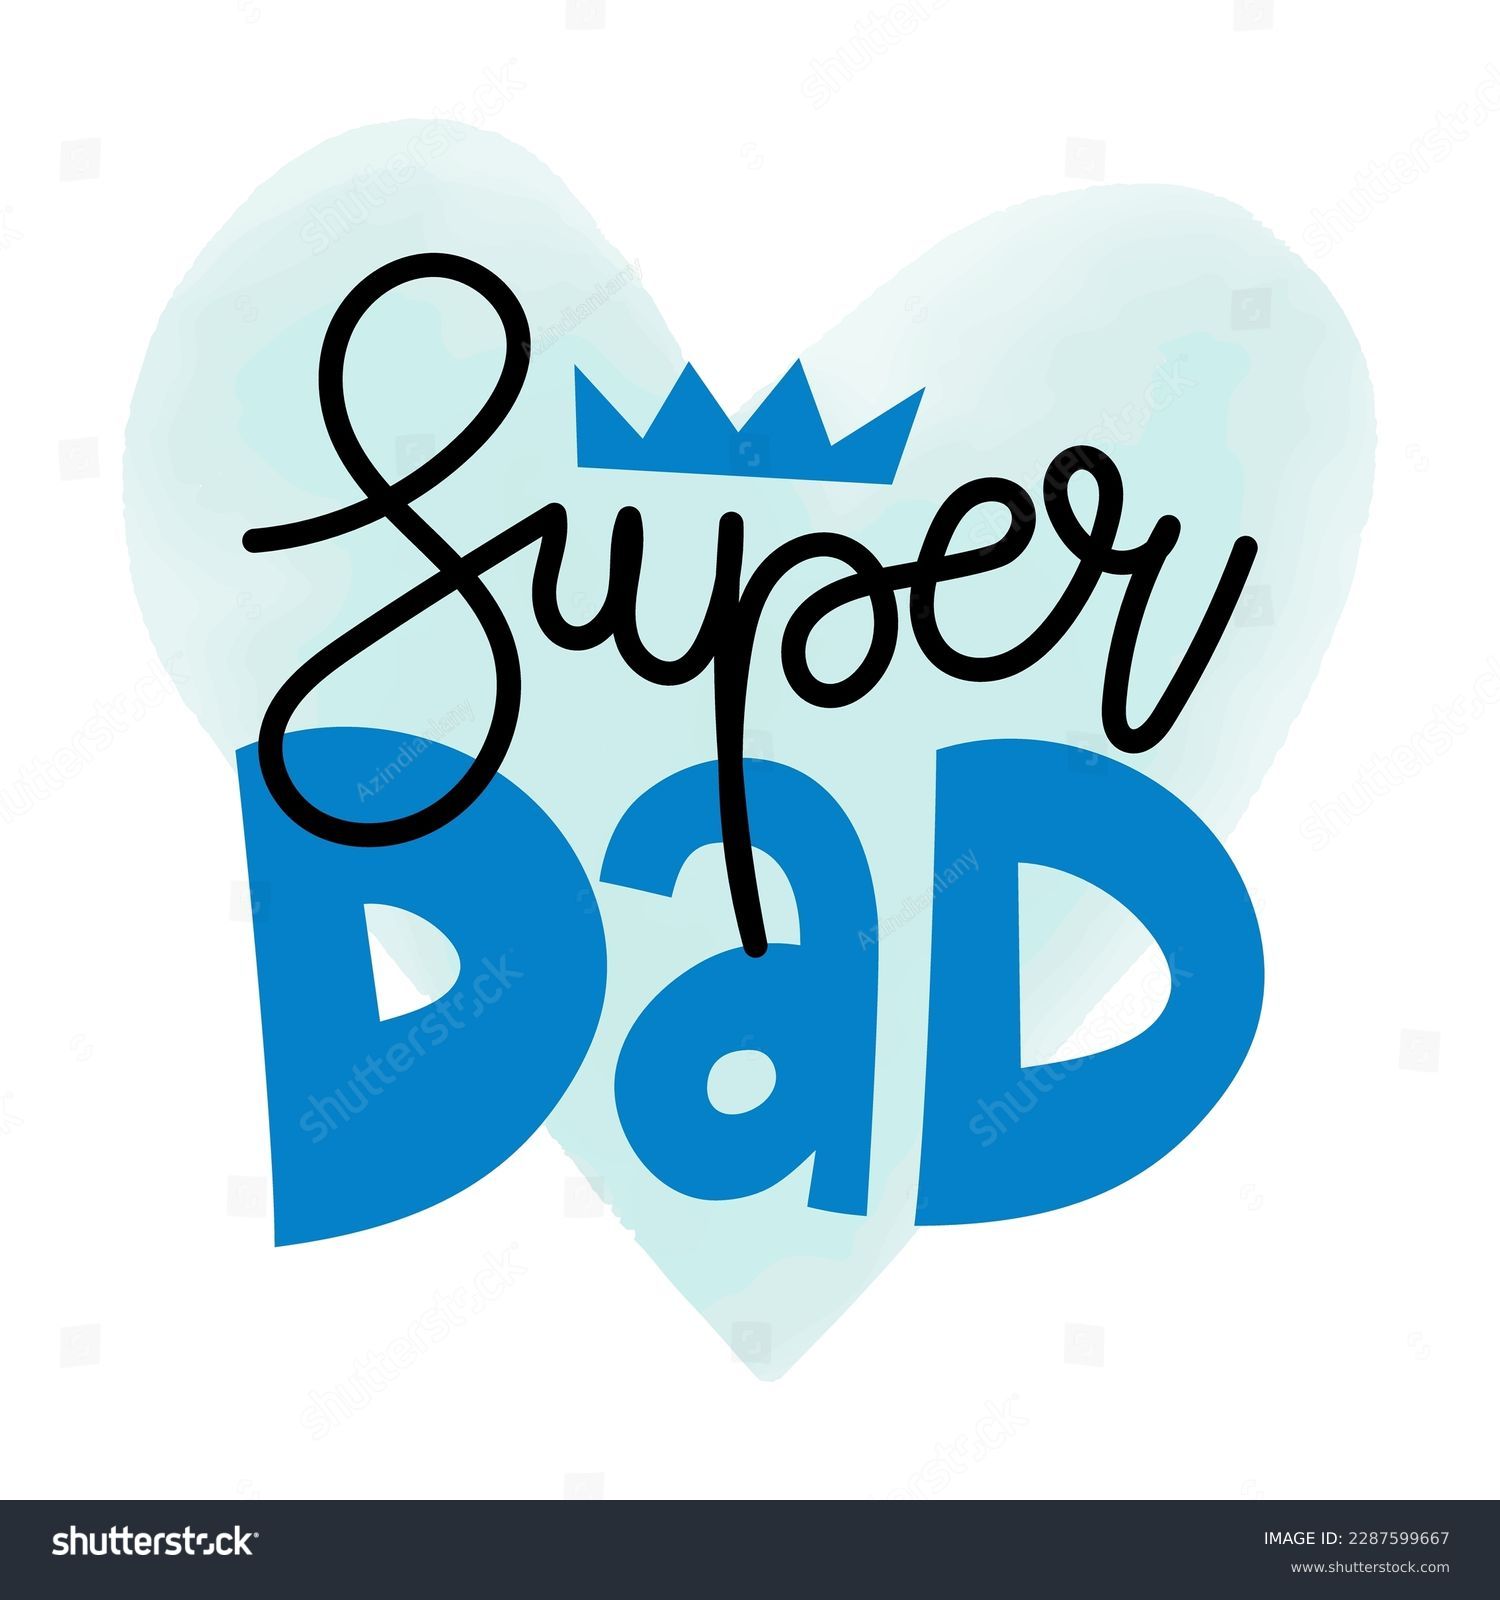 SVG of Super Dad - Happy Father's Day lettering. Handmade calligraphy vector illustration. Father's day card with crown.  Good for t shirt, mug, scrap booking, posters, textiles, gifts. svg